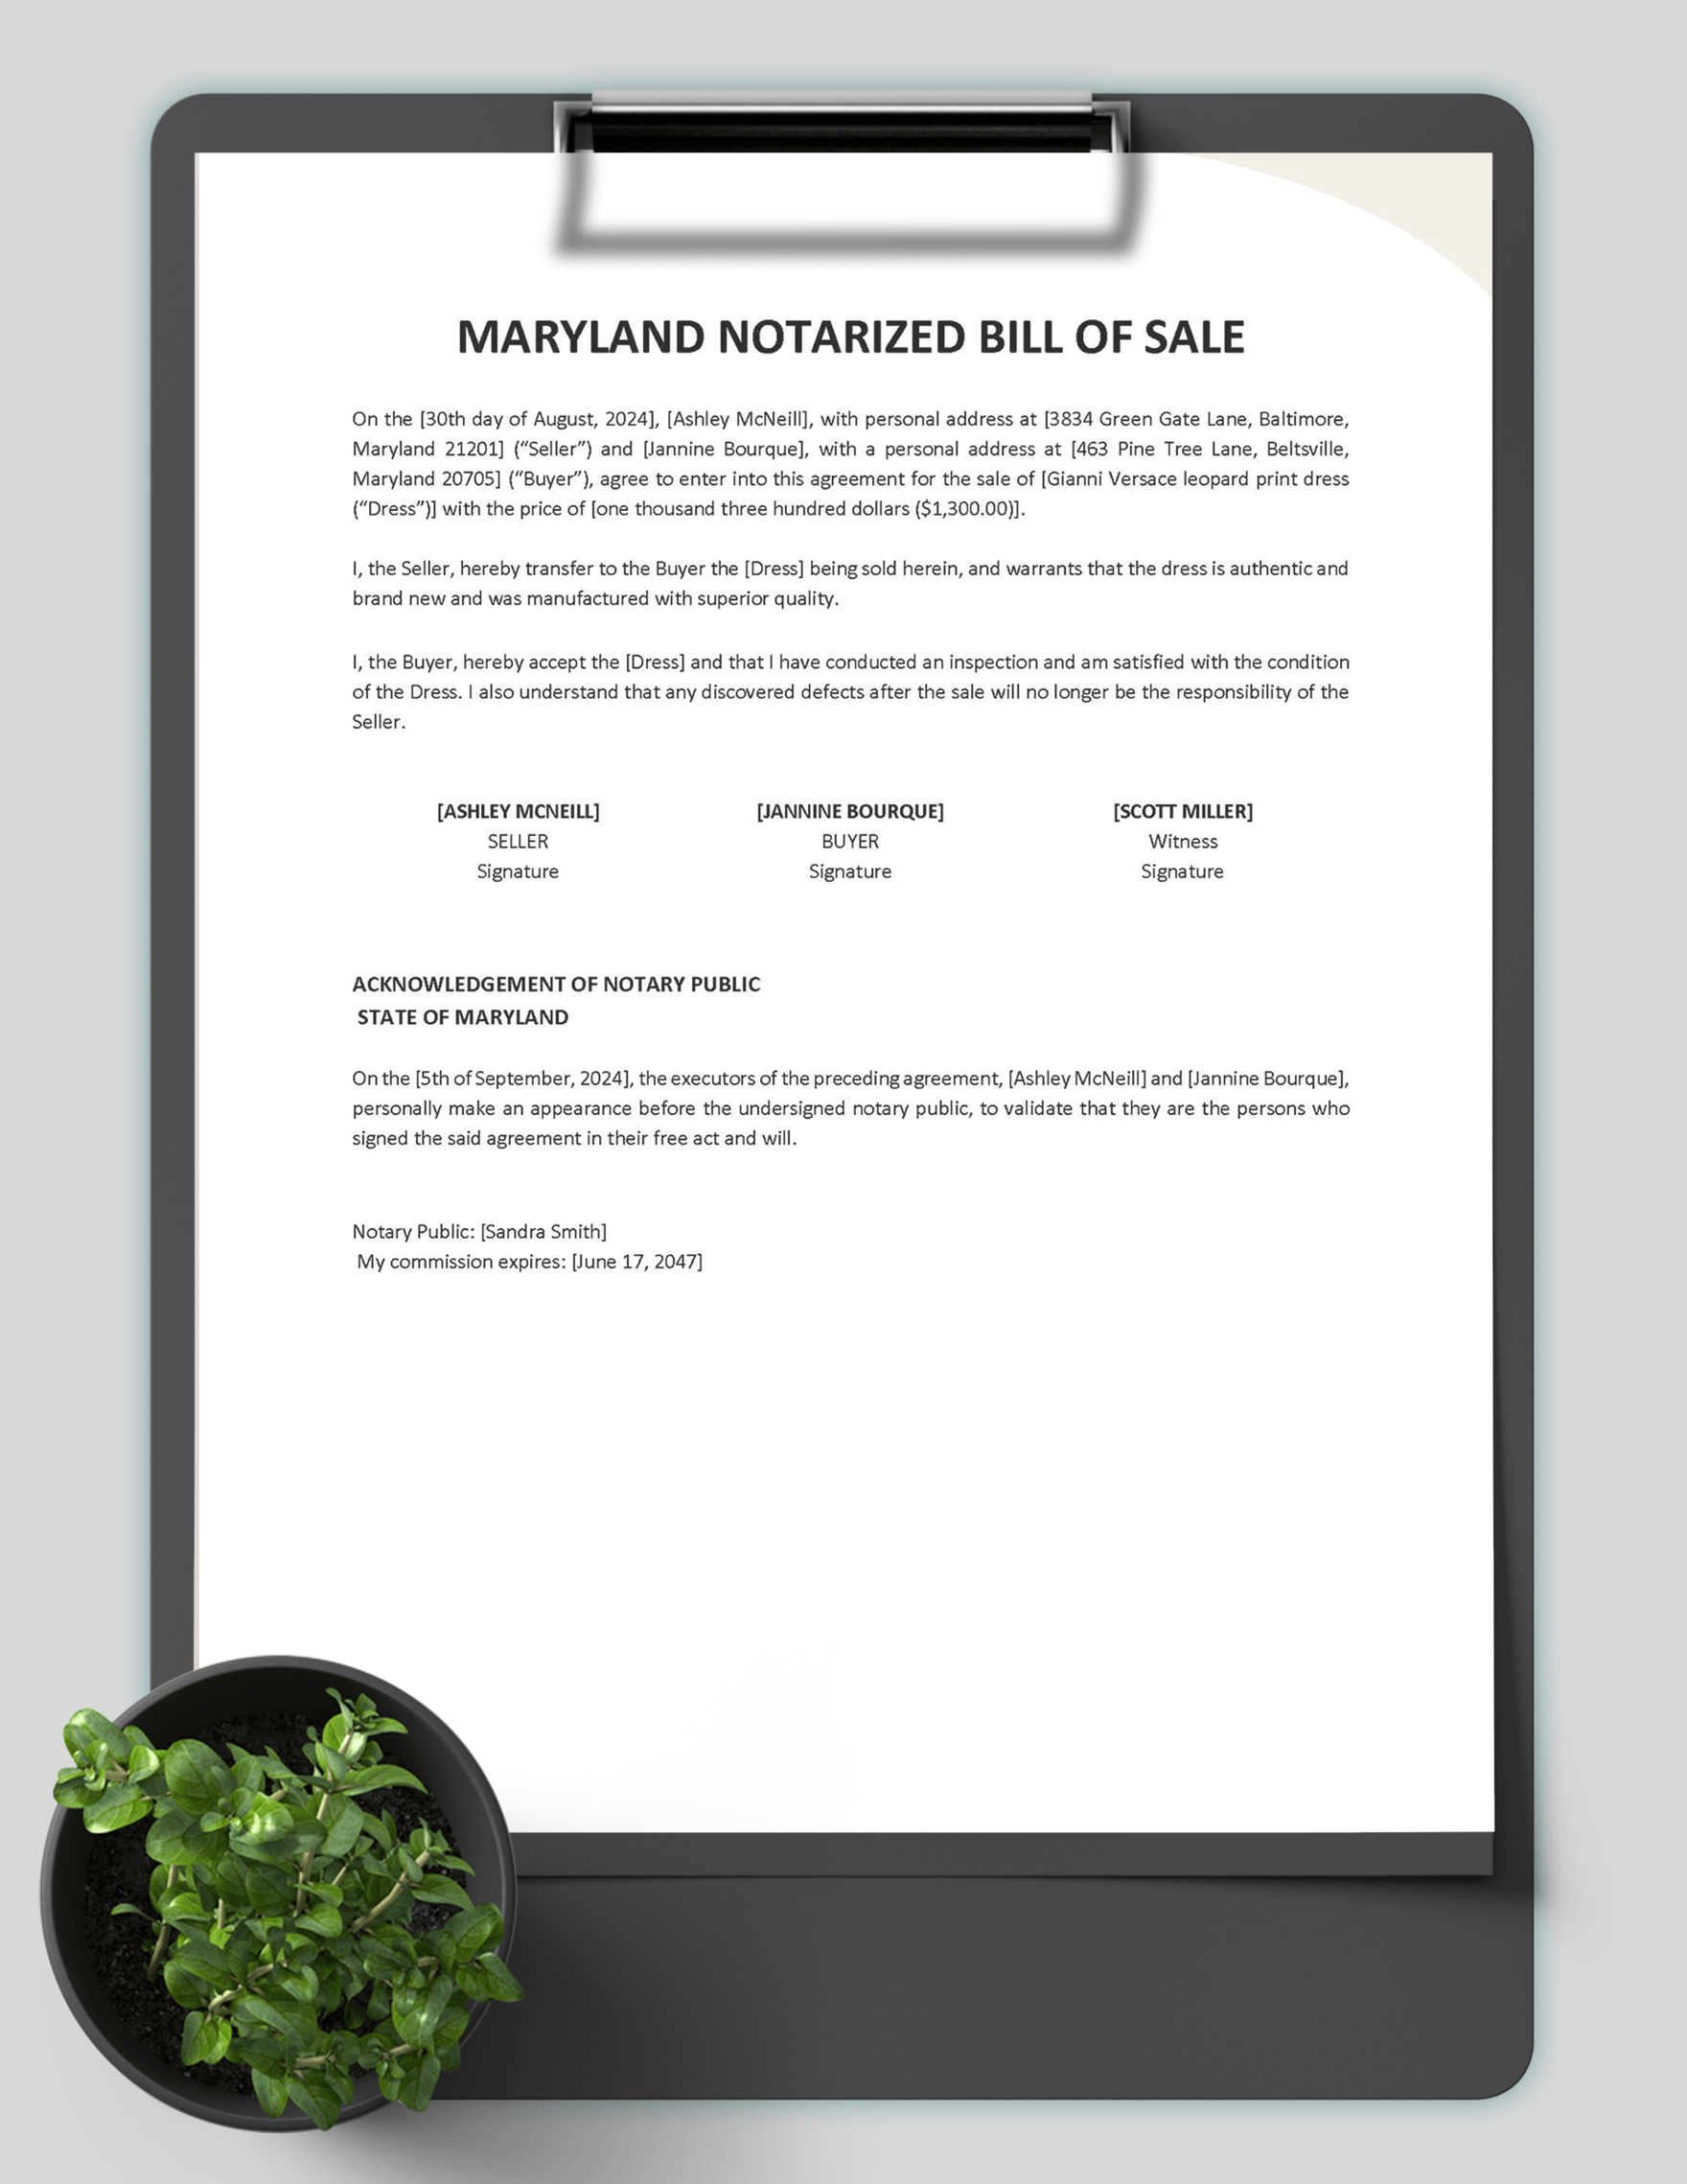 Maryland Notarized Bill of Sale Template